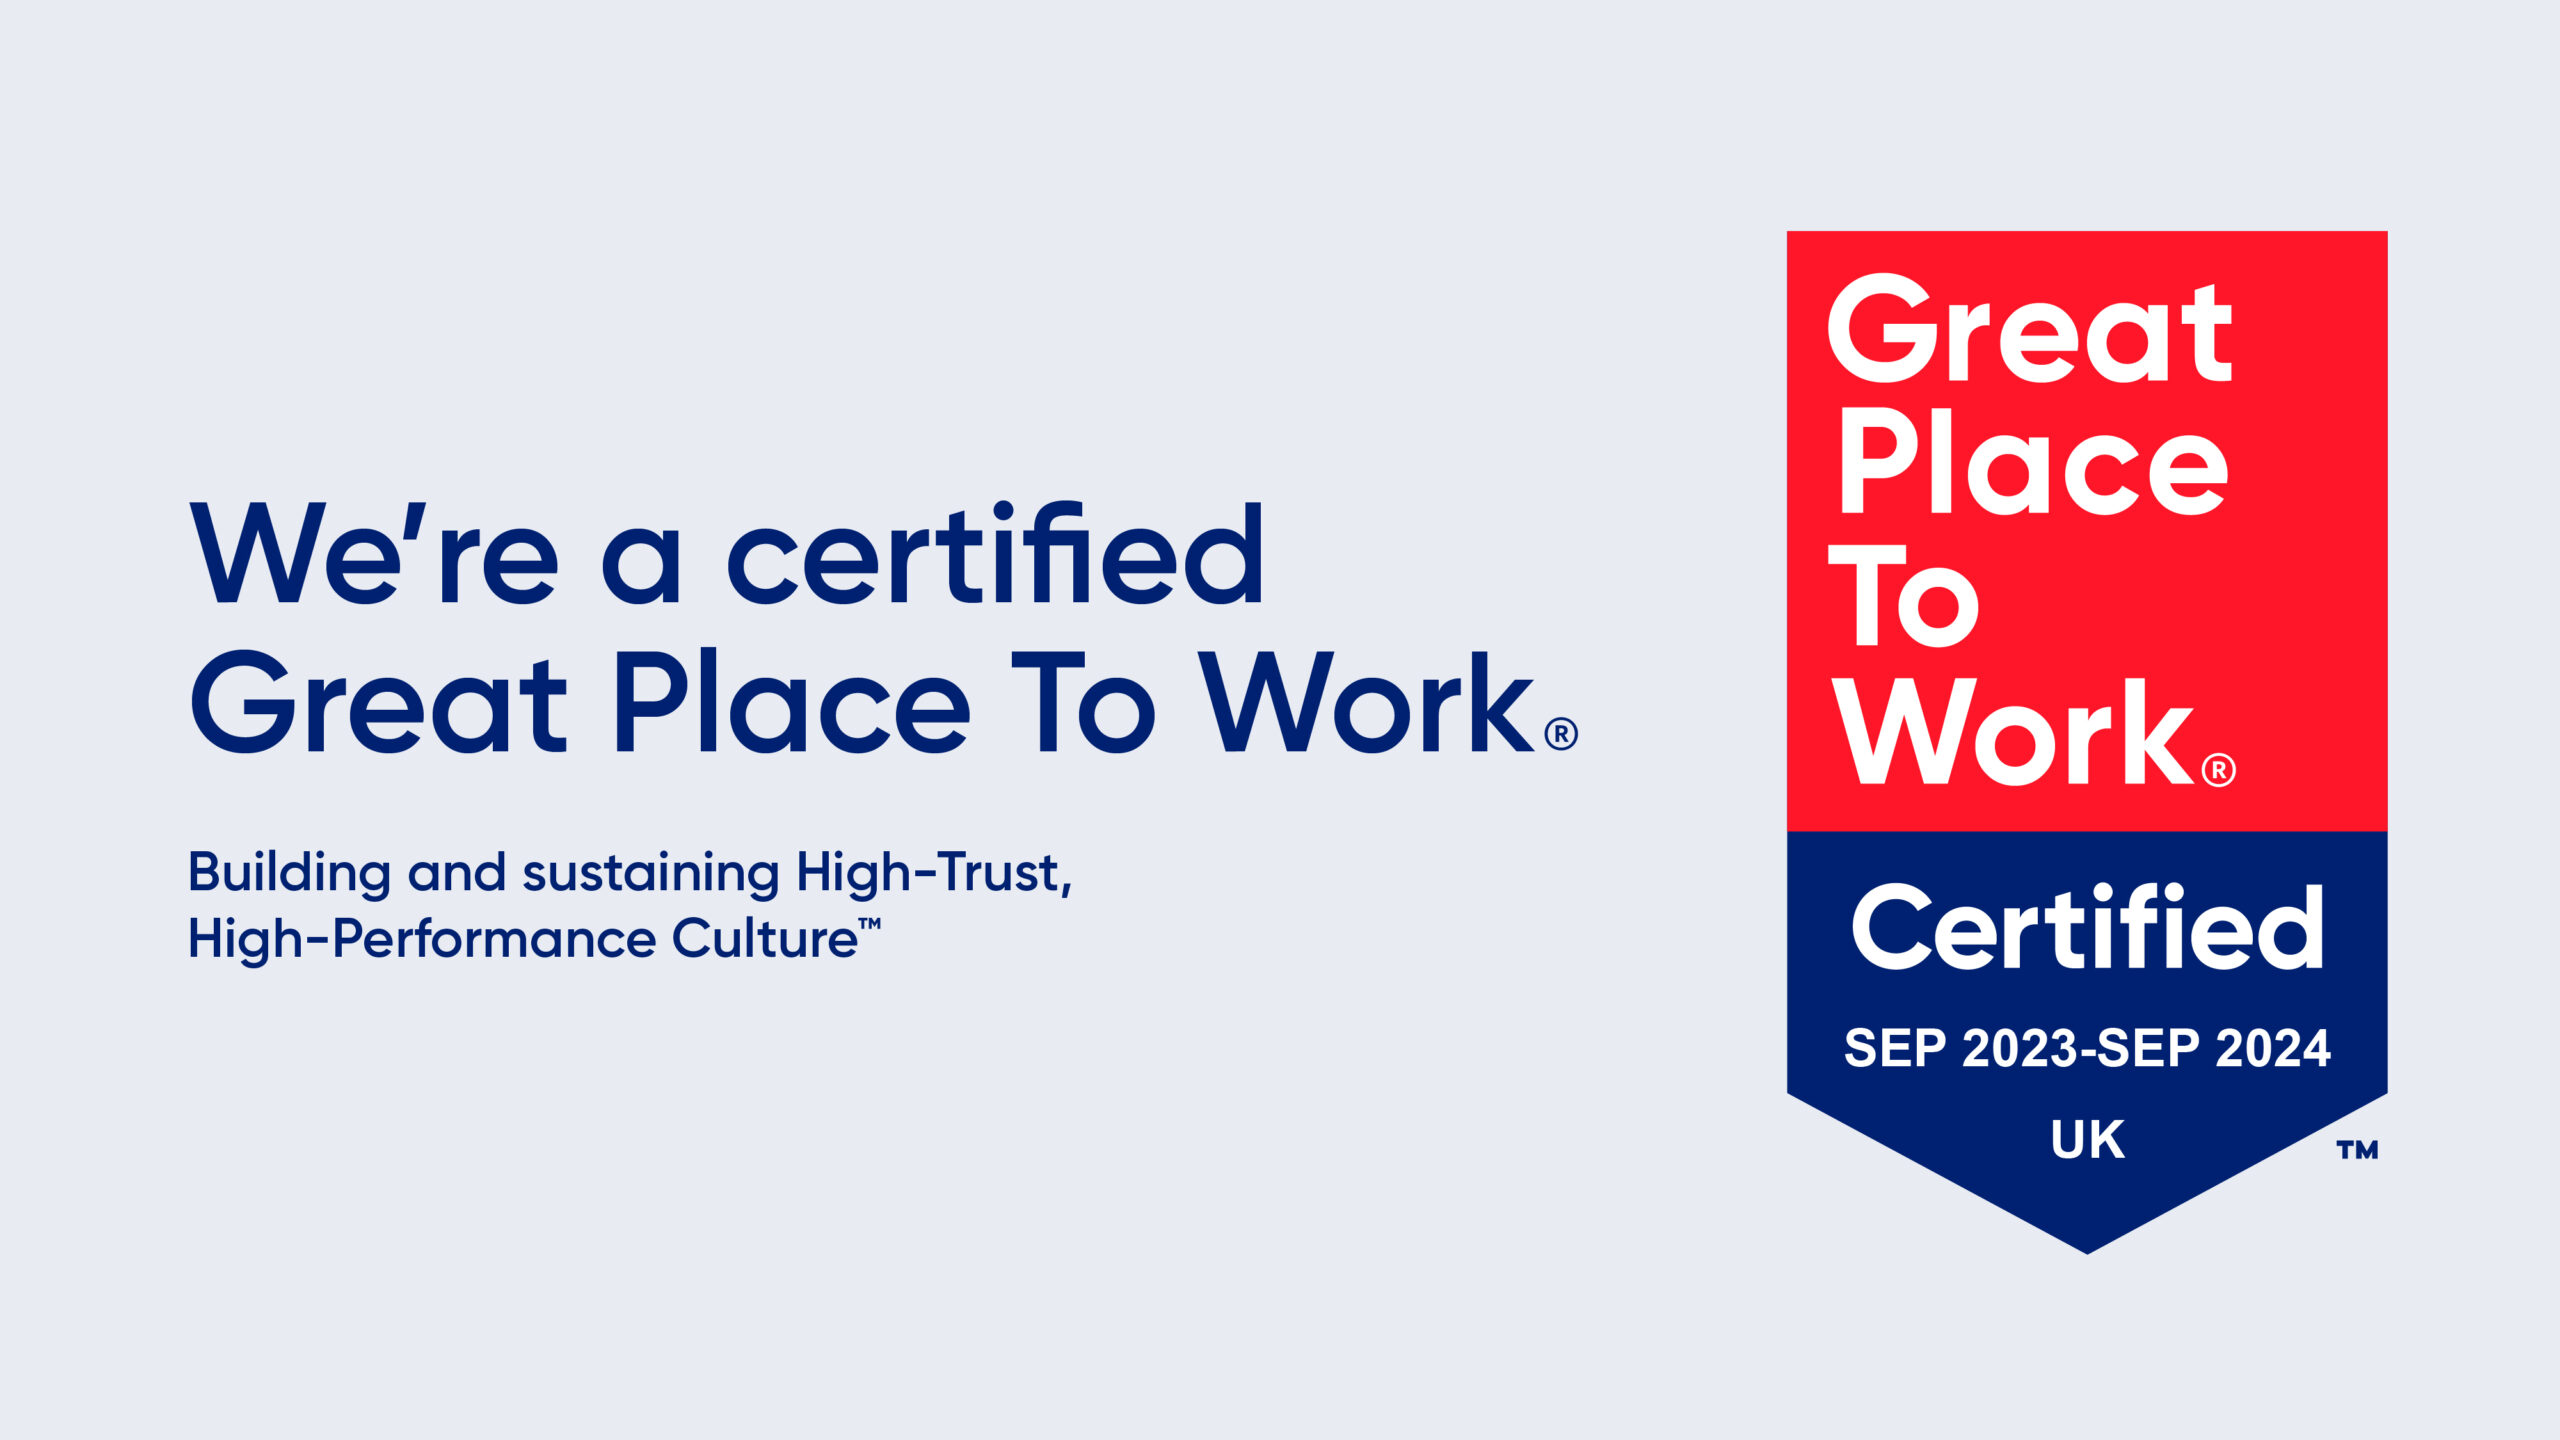 Great Place to Work® recognitions - ISS World